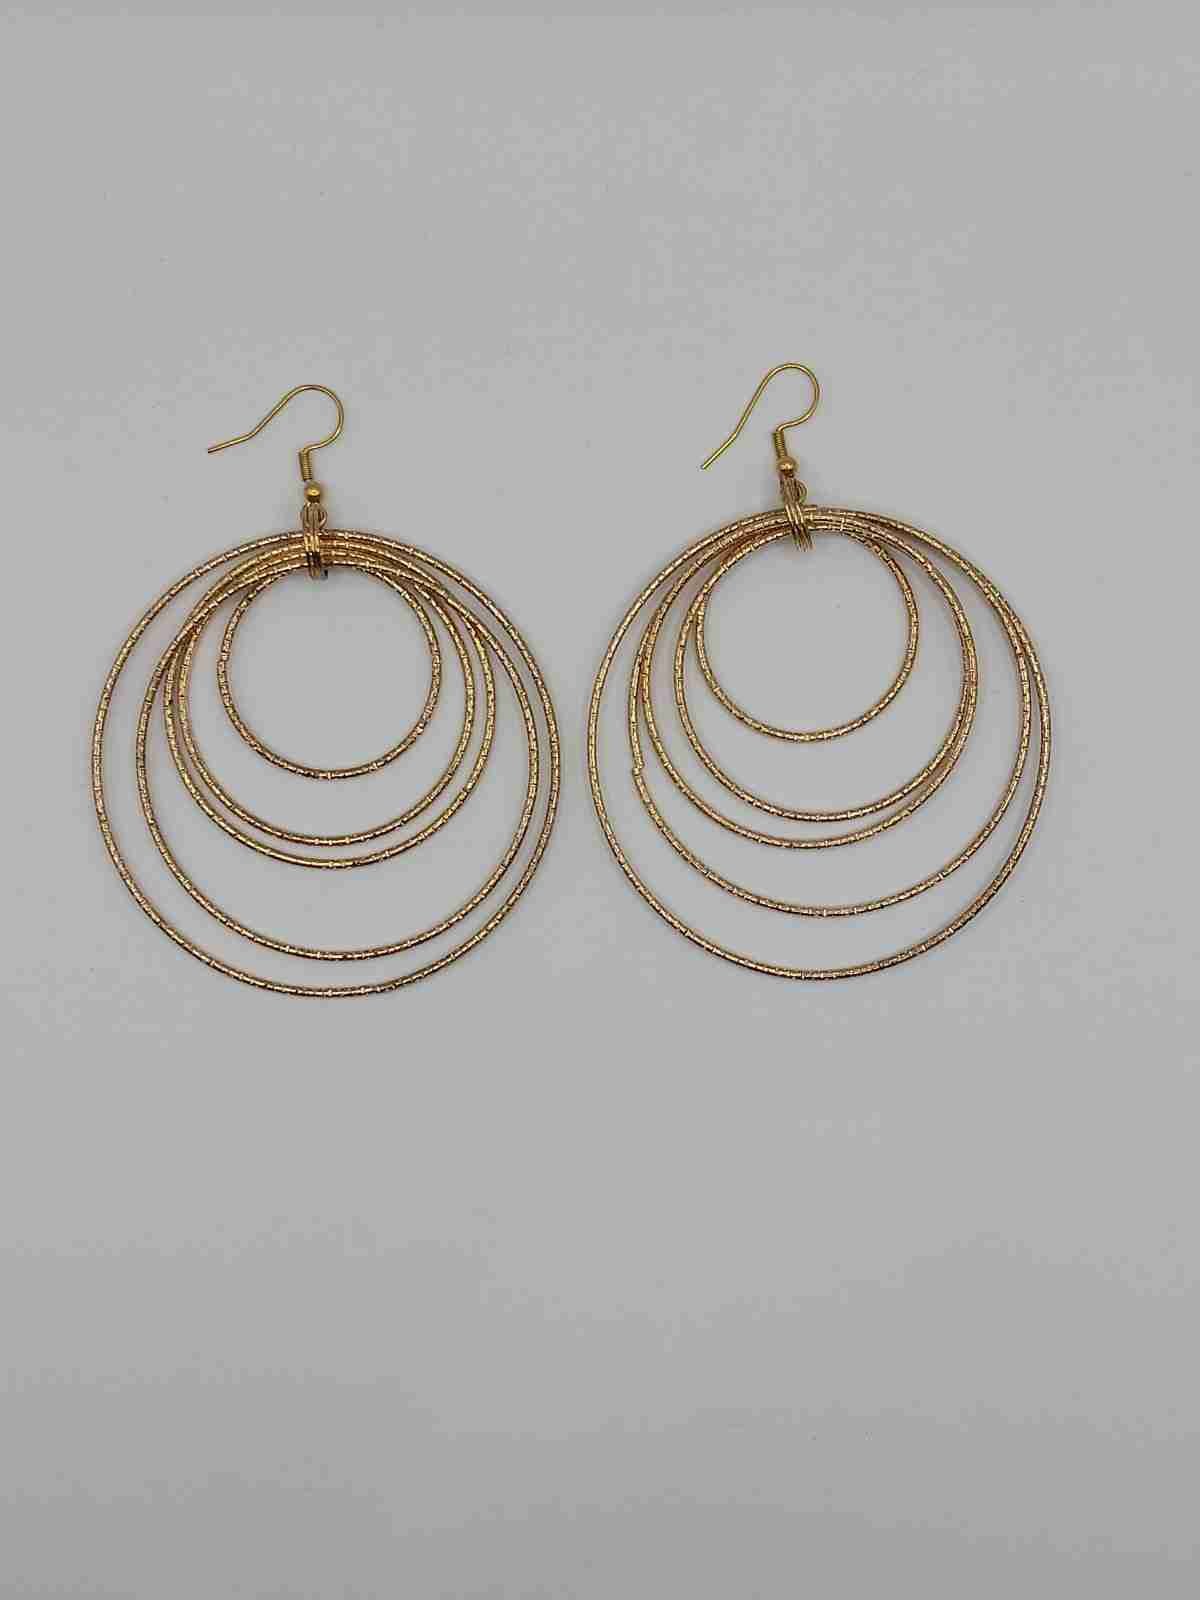 GOLD EARRINGS WITH CIRCLES